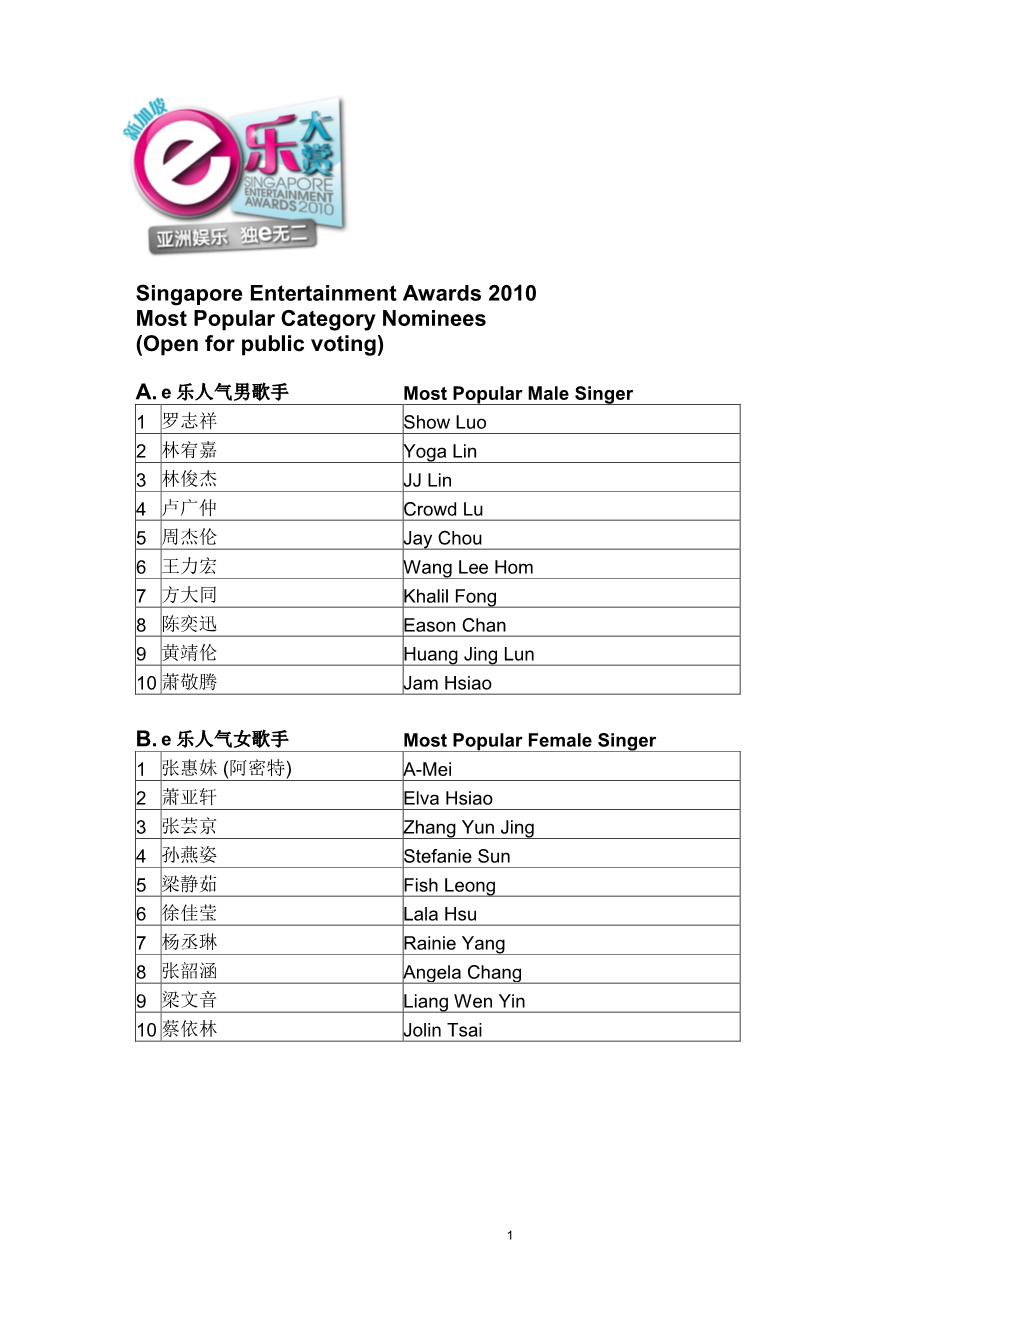 Singapore Entertainment Awards 2010 Most Popular Category Nominees (Open for Public Voting)